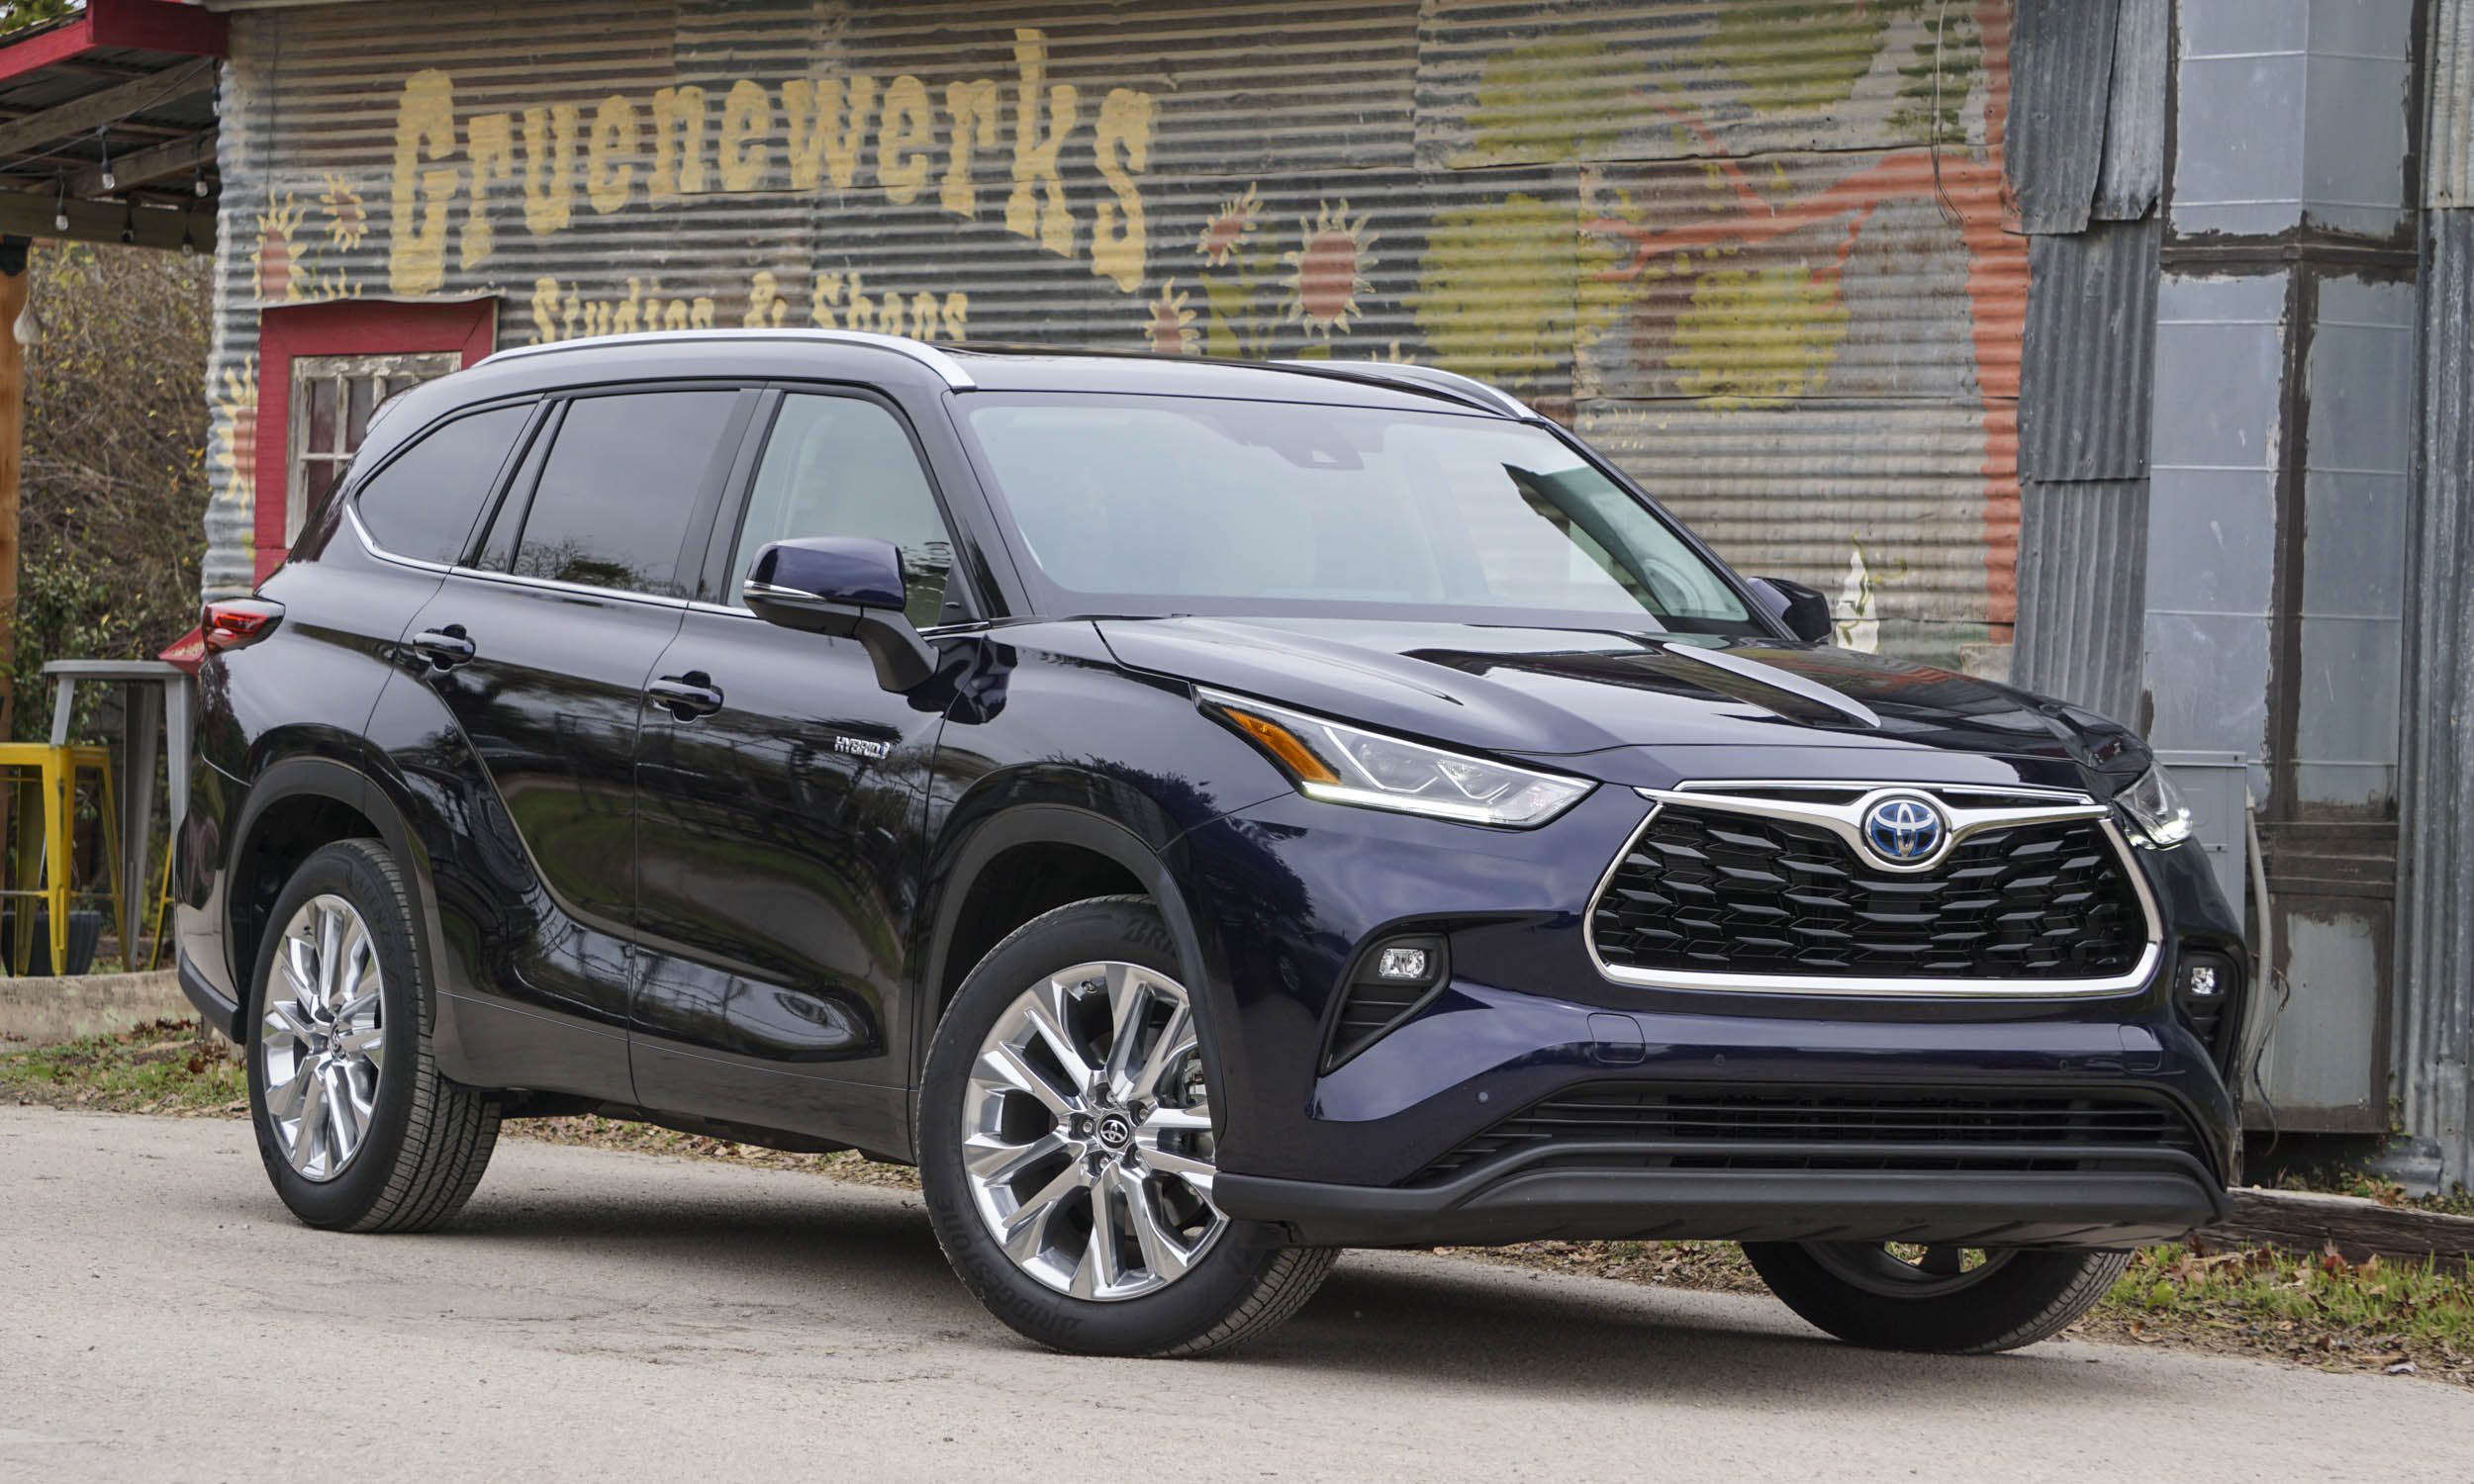 2020 Toyota Highlander: First Drive Review